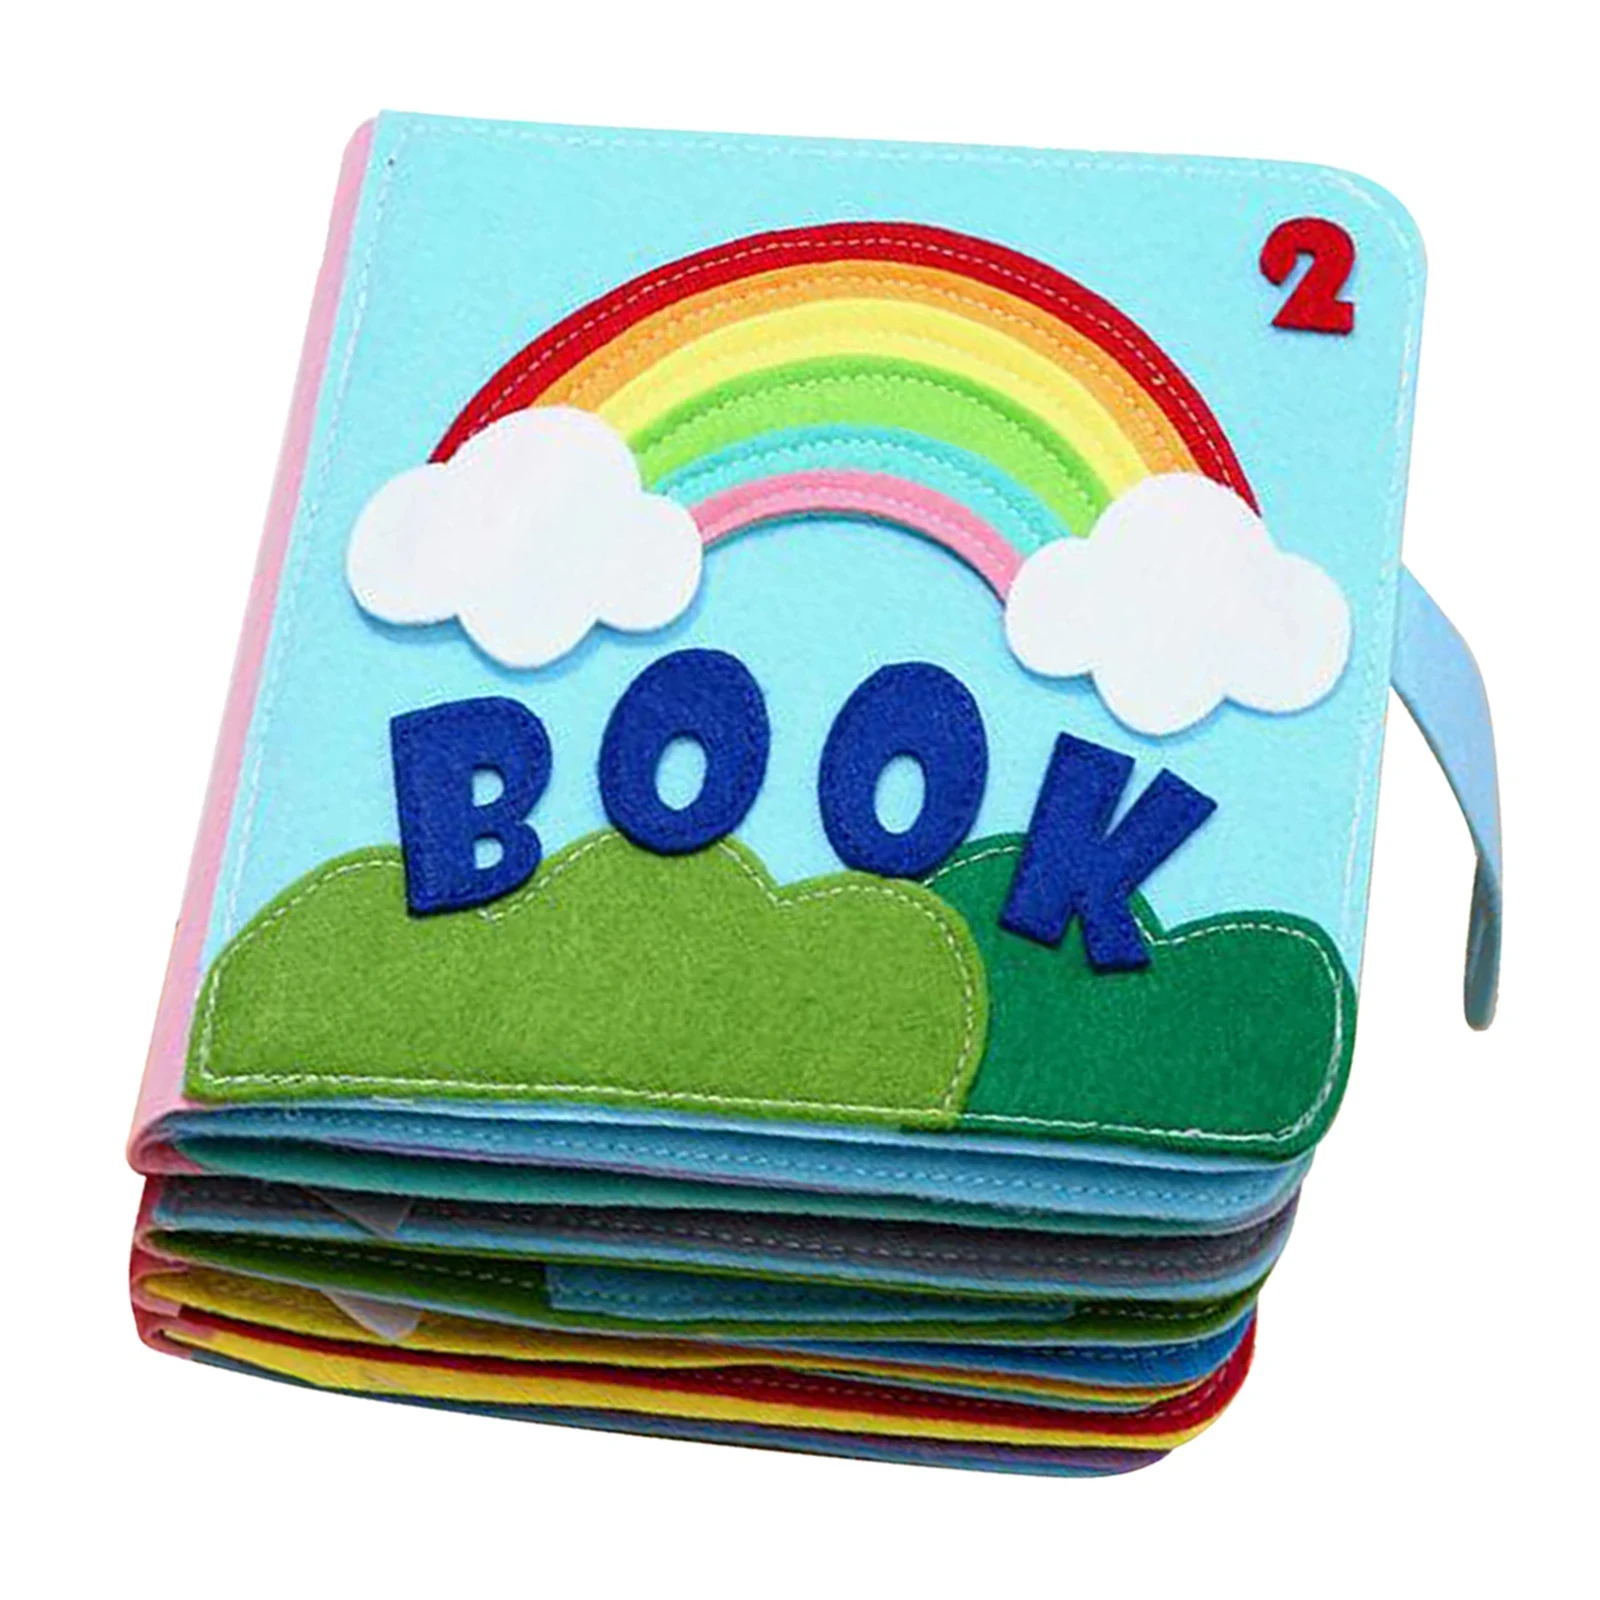 Felt Quiet Book Montessori Toys For Toddlers 1Y Basic Skills Activity Toys Preschool Learning Baby Sensory Educational Busy Book